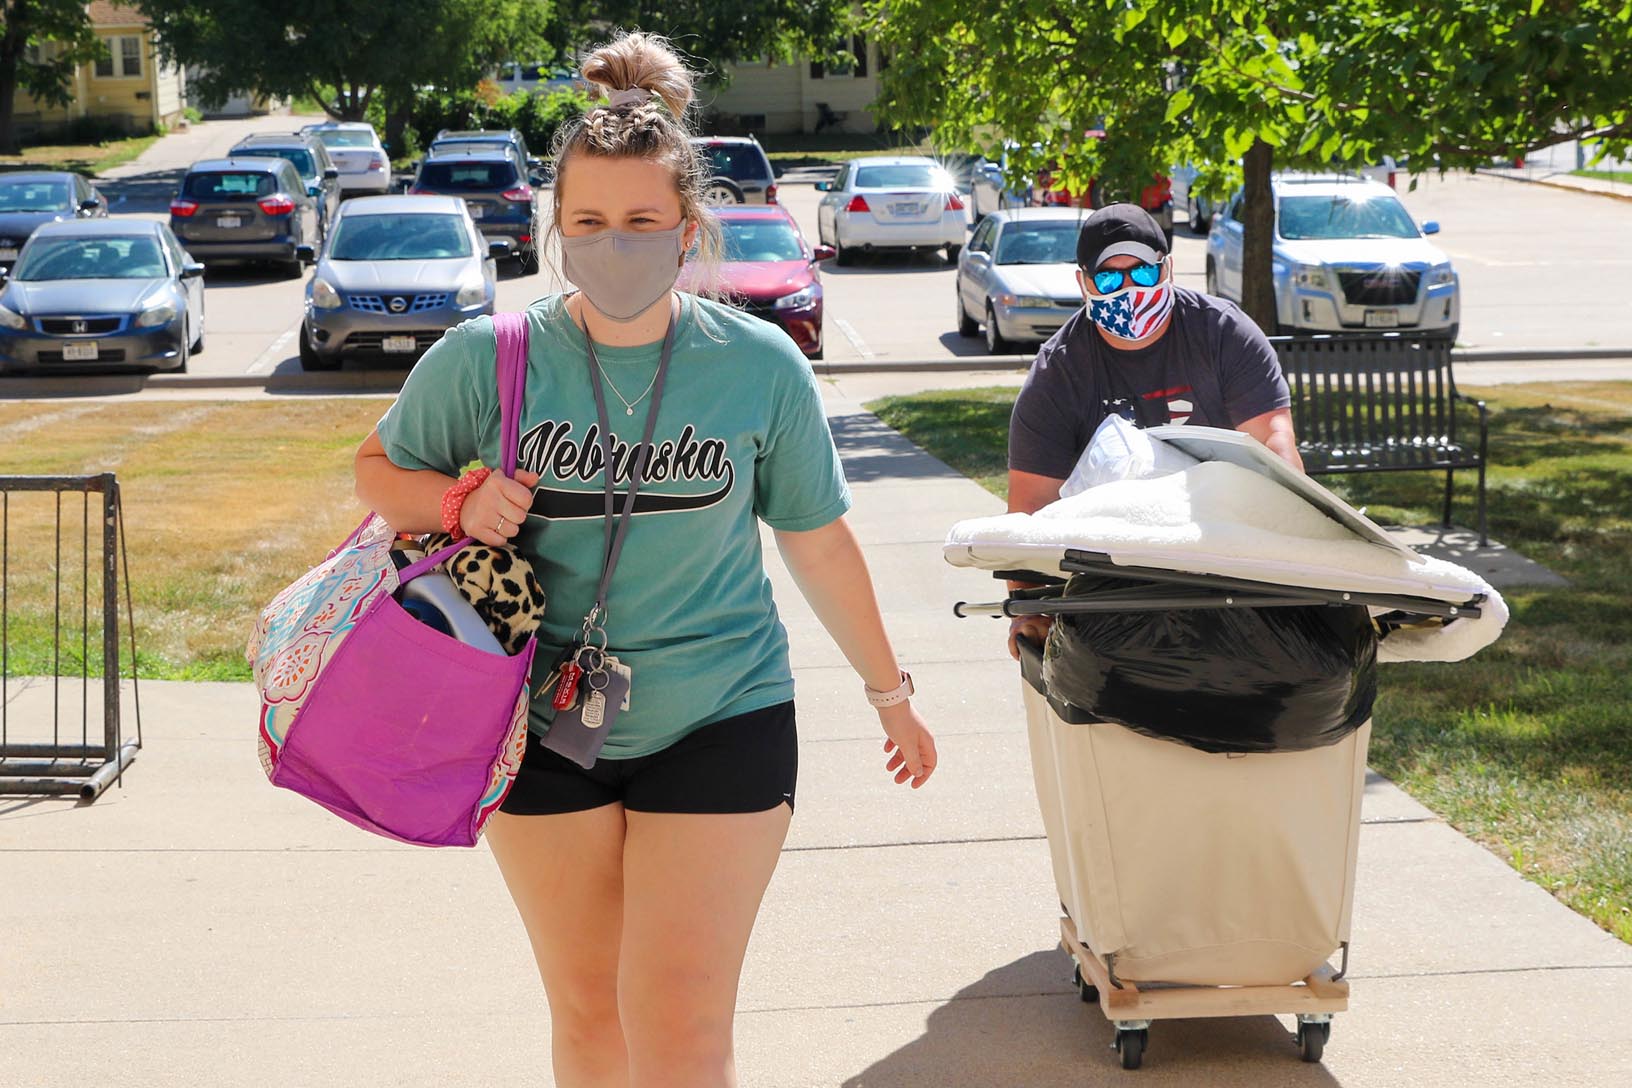 UNK freshman Morgan Bice of Hickman and her father Chad move items into the Centennial Towers East residence hall on Monday morning. Bice will begin classes next week in UNK’s pre-nursing program. (Photos by Todd Gottula, UNK Communications)